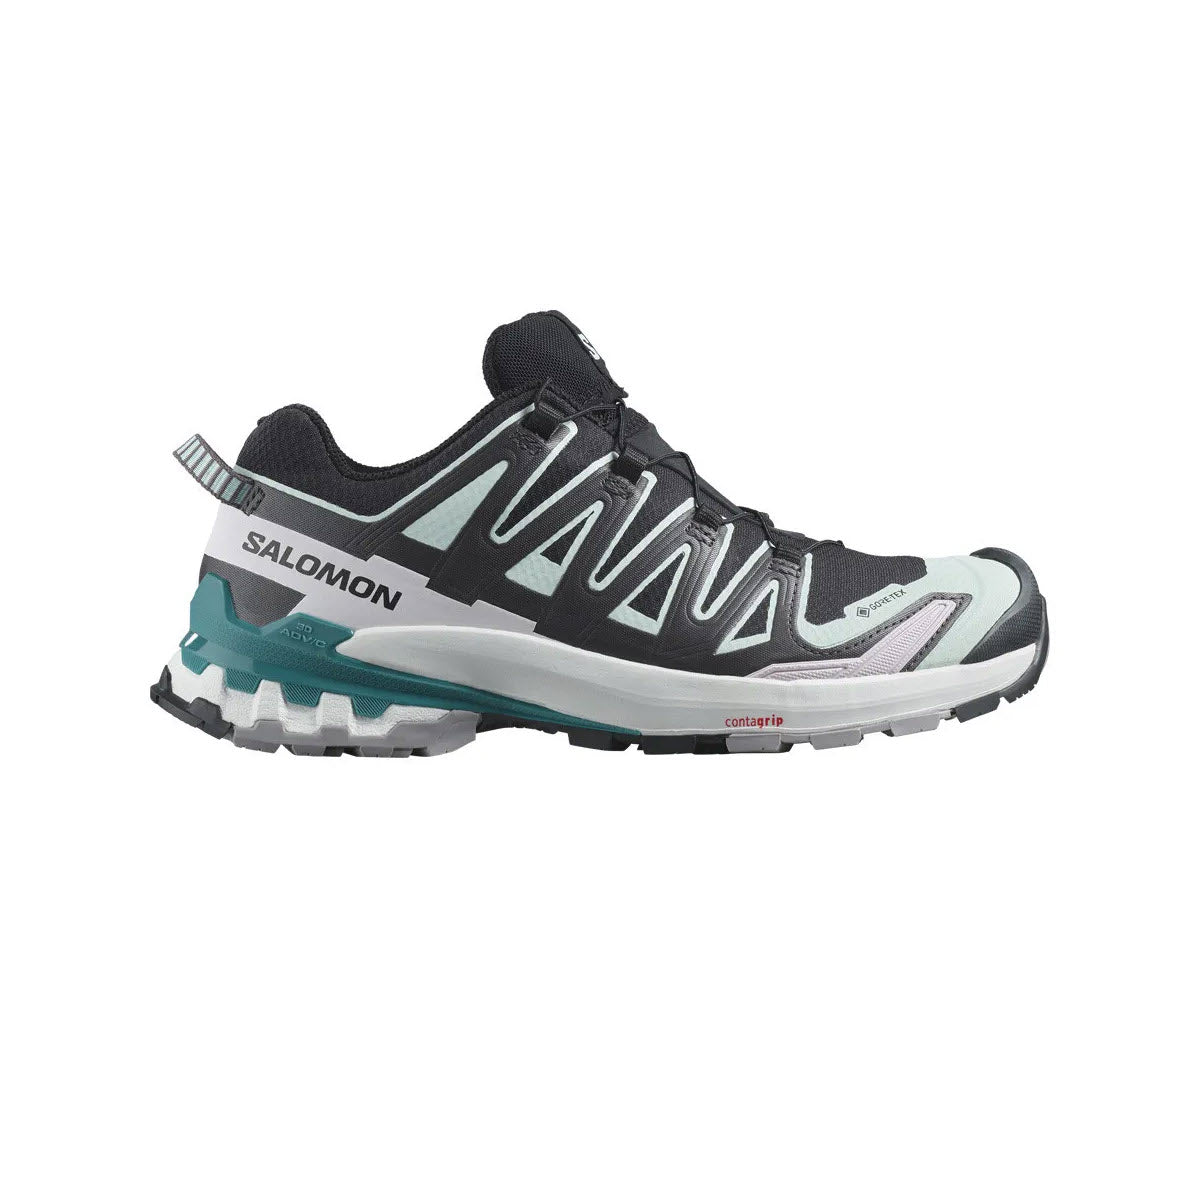 A single Salomon XA Pro 3D V9 GTX Black/Bleached Aqua/Harbor Blue trail running shoe featuring a GORE-TEX waterproof membrane displayed against a white background, with a black and white upper and teal accents.